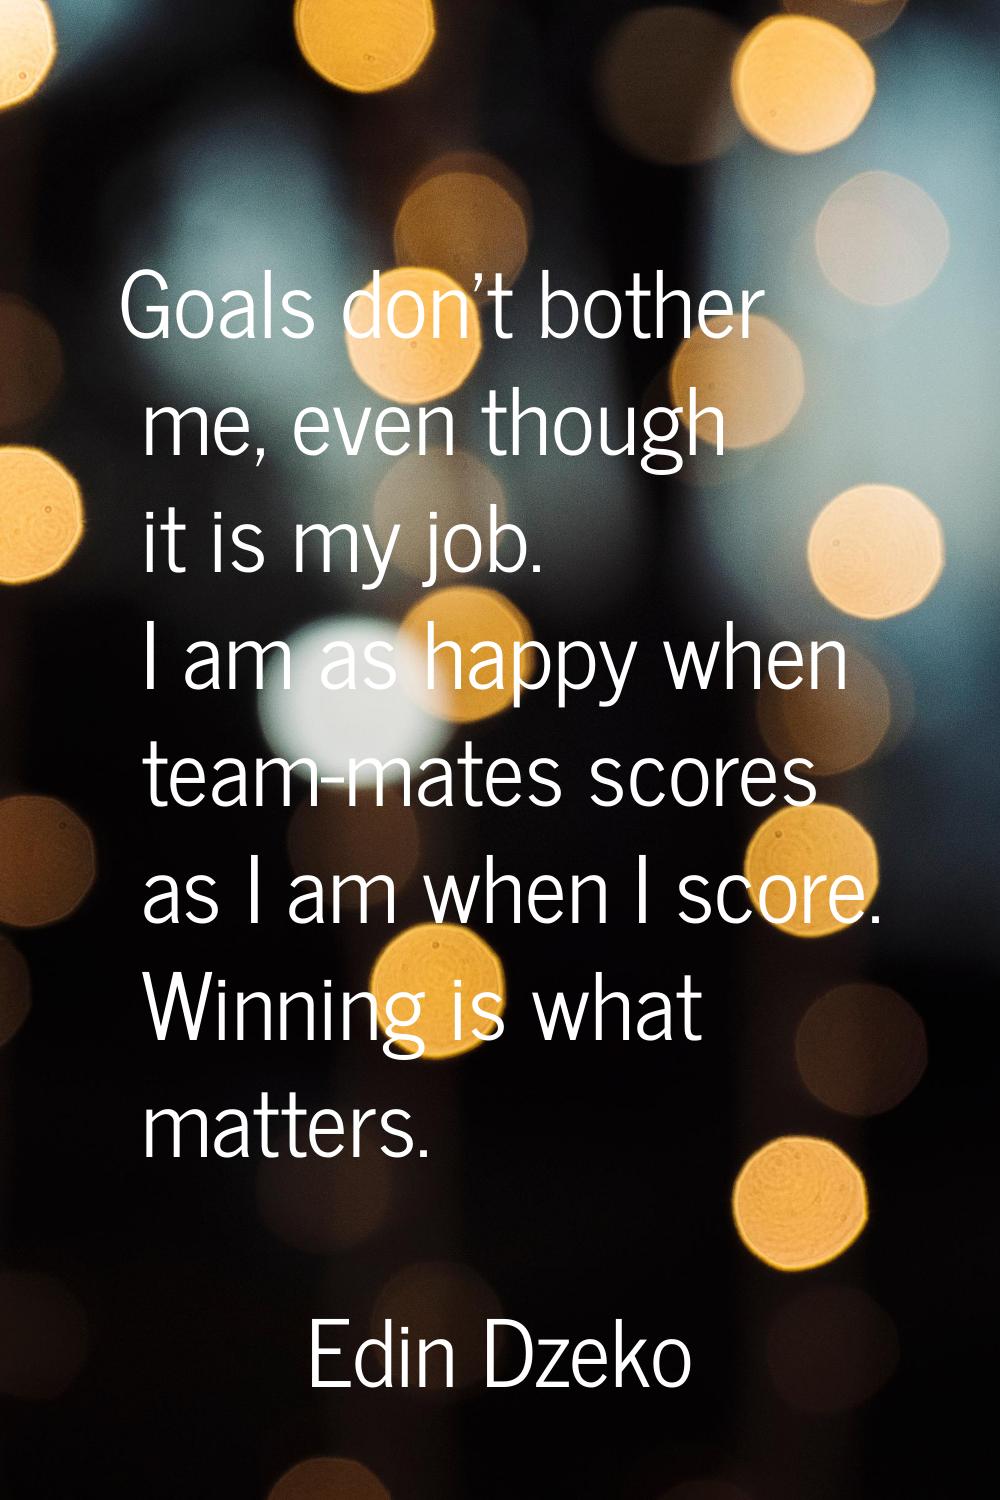 Goals don't bother me, even though it is my job. I am as happy when team-mates scores as I am when 